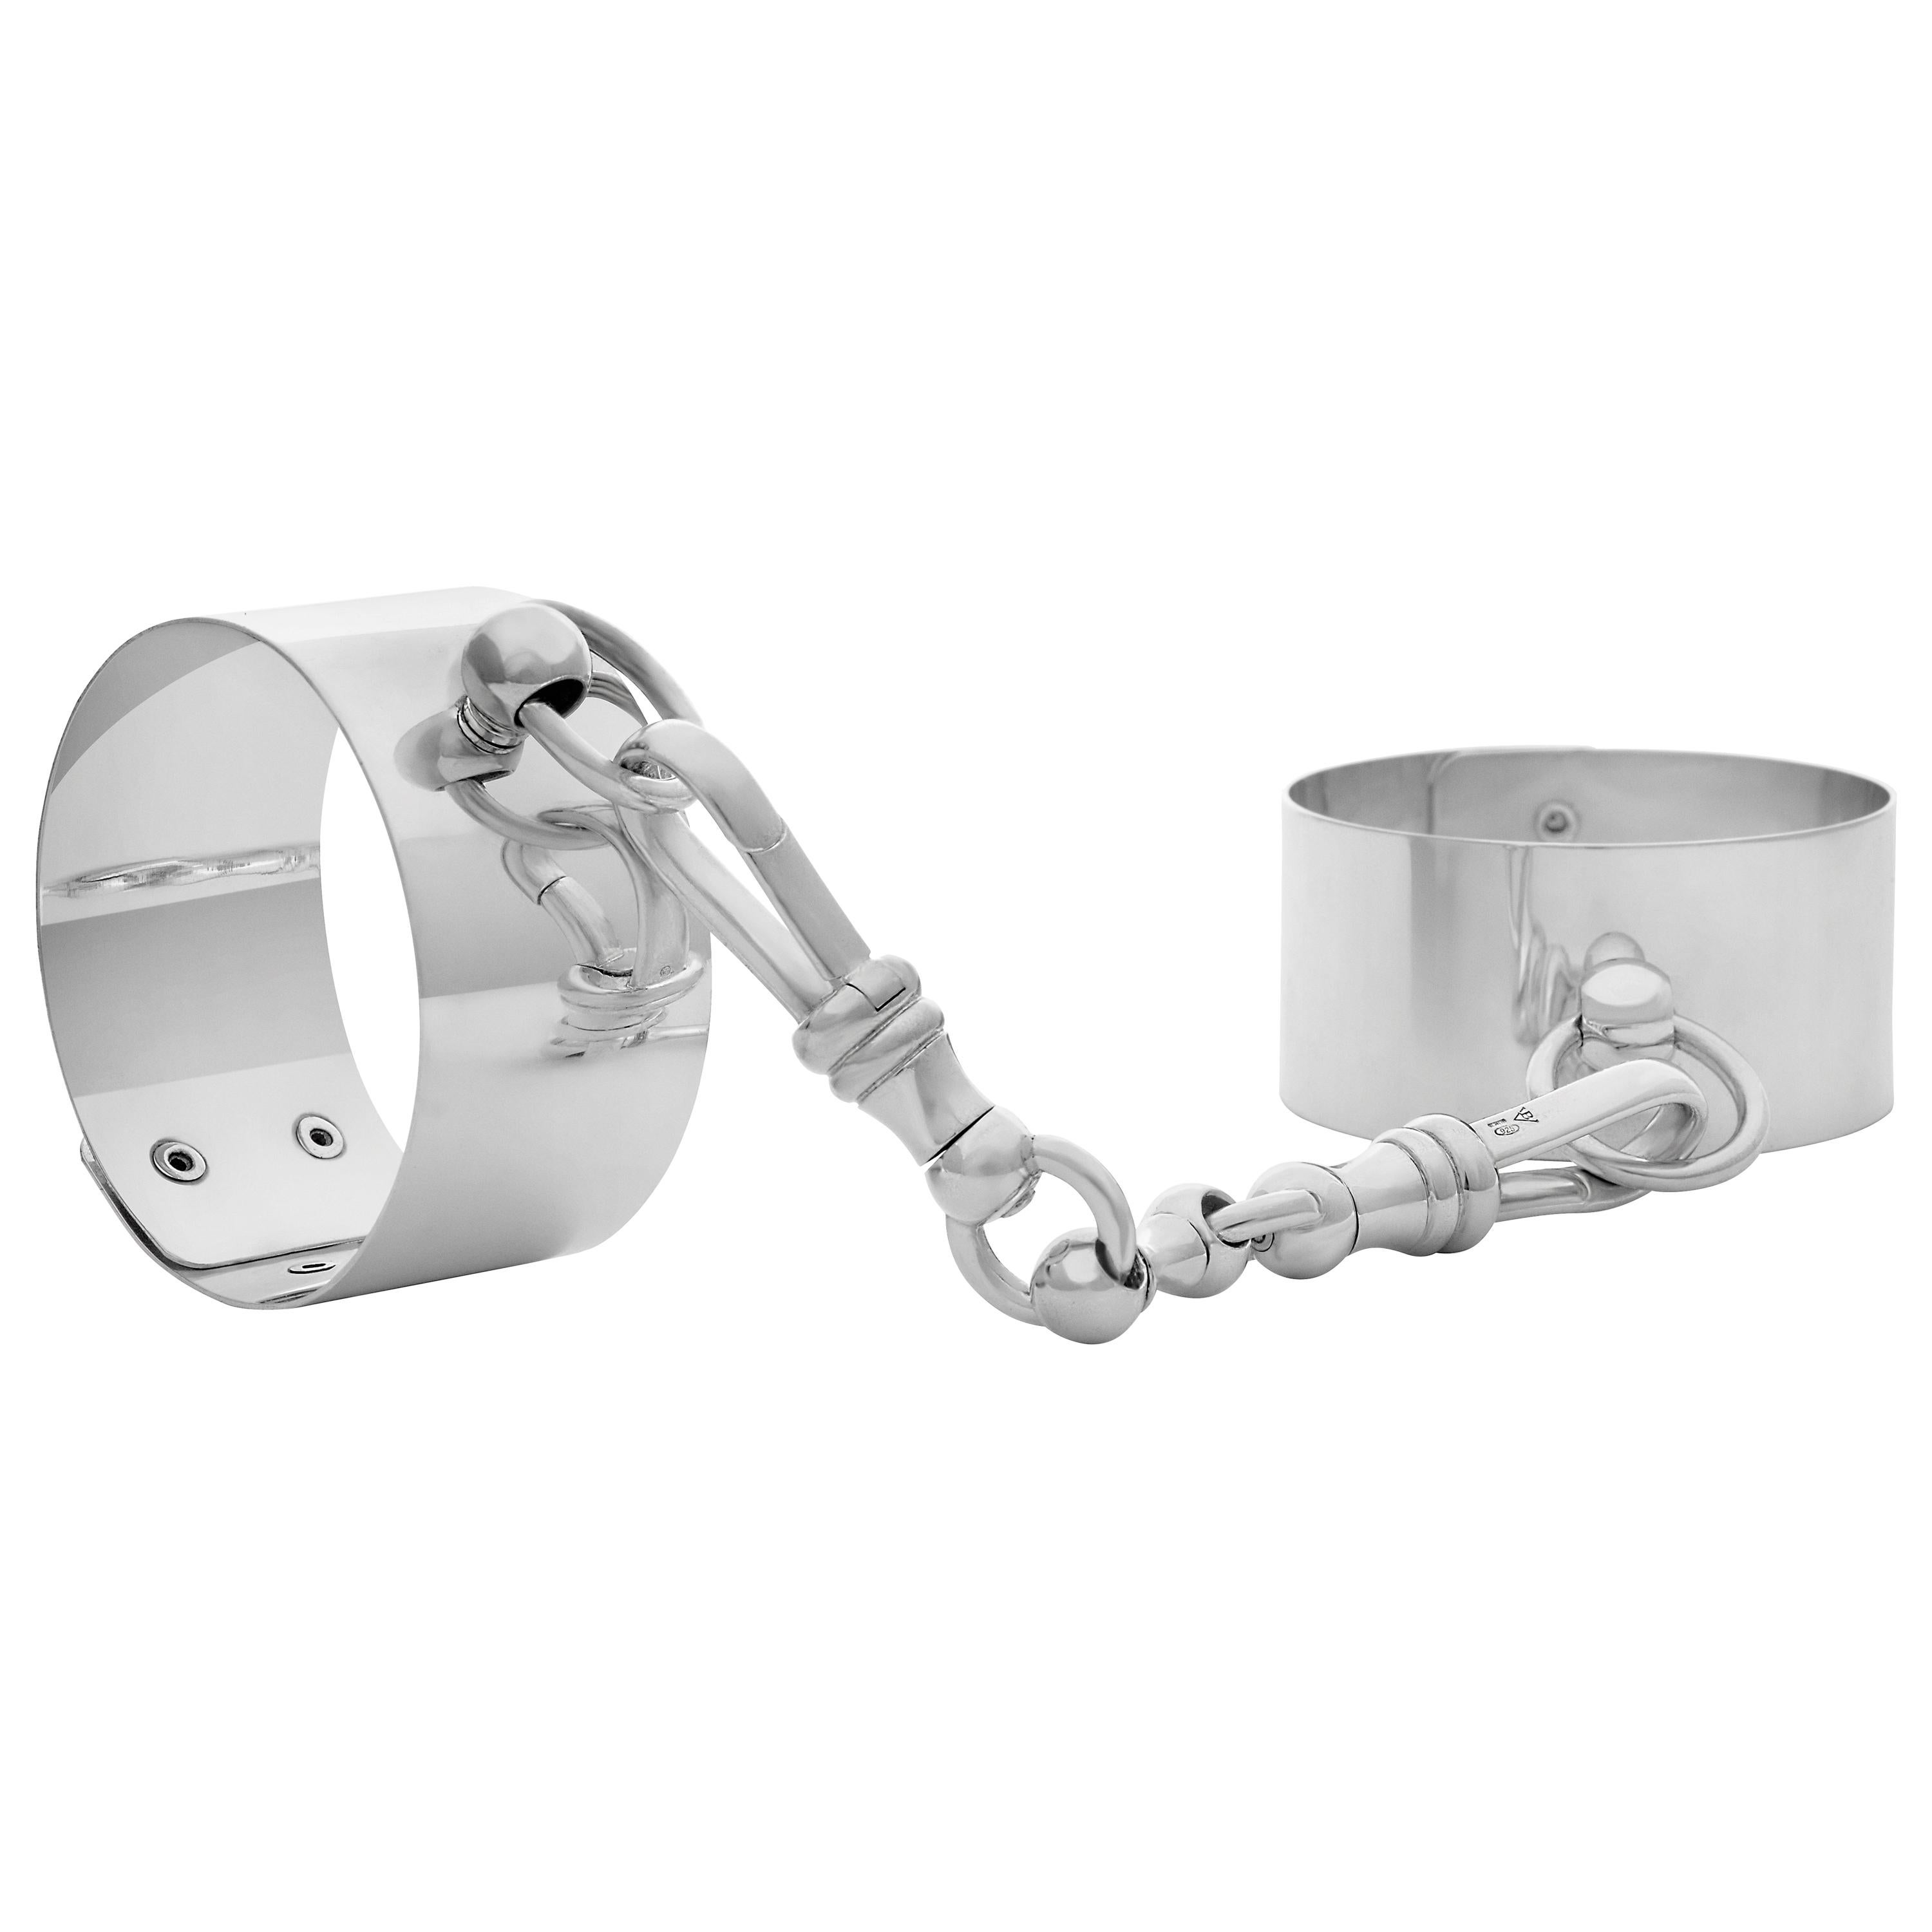 Betony Vernon "O'Ring Wrist Cuff Large Set" Bracelet Pair with link Sterling 925 For Sale